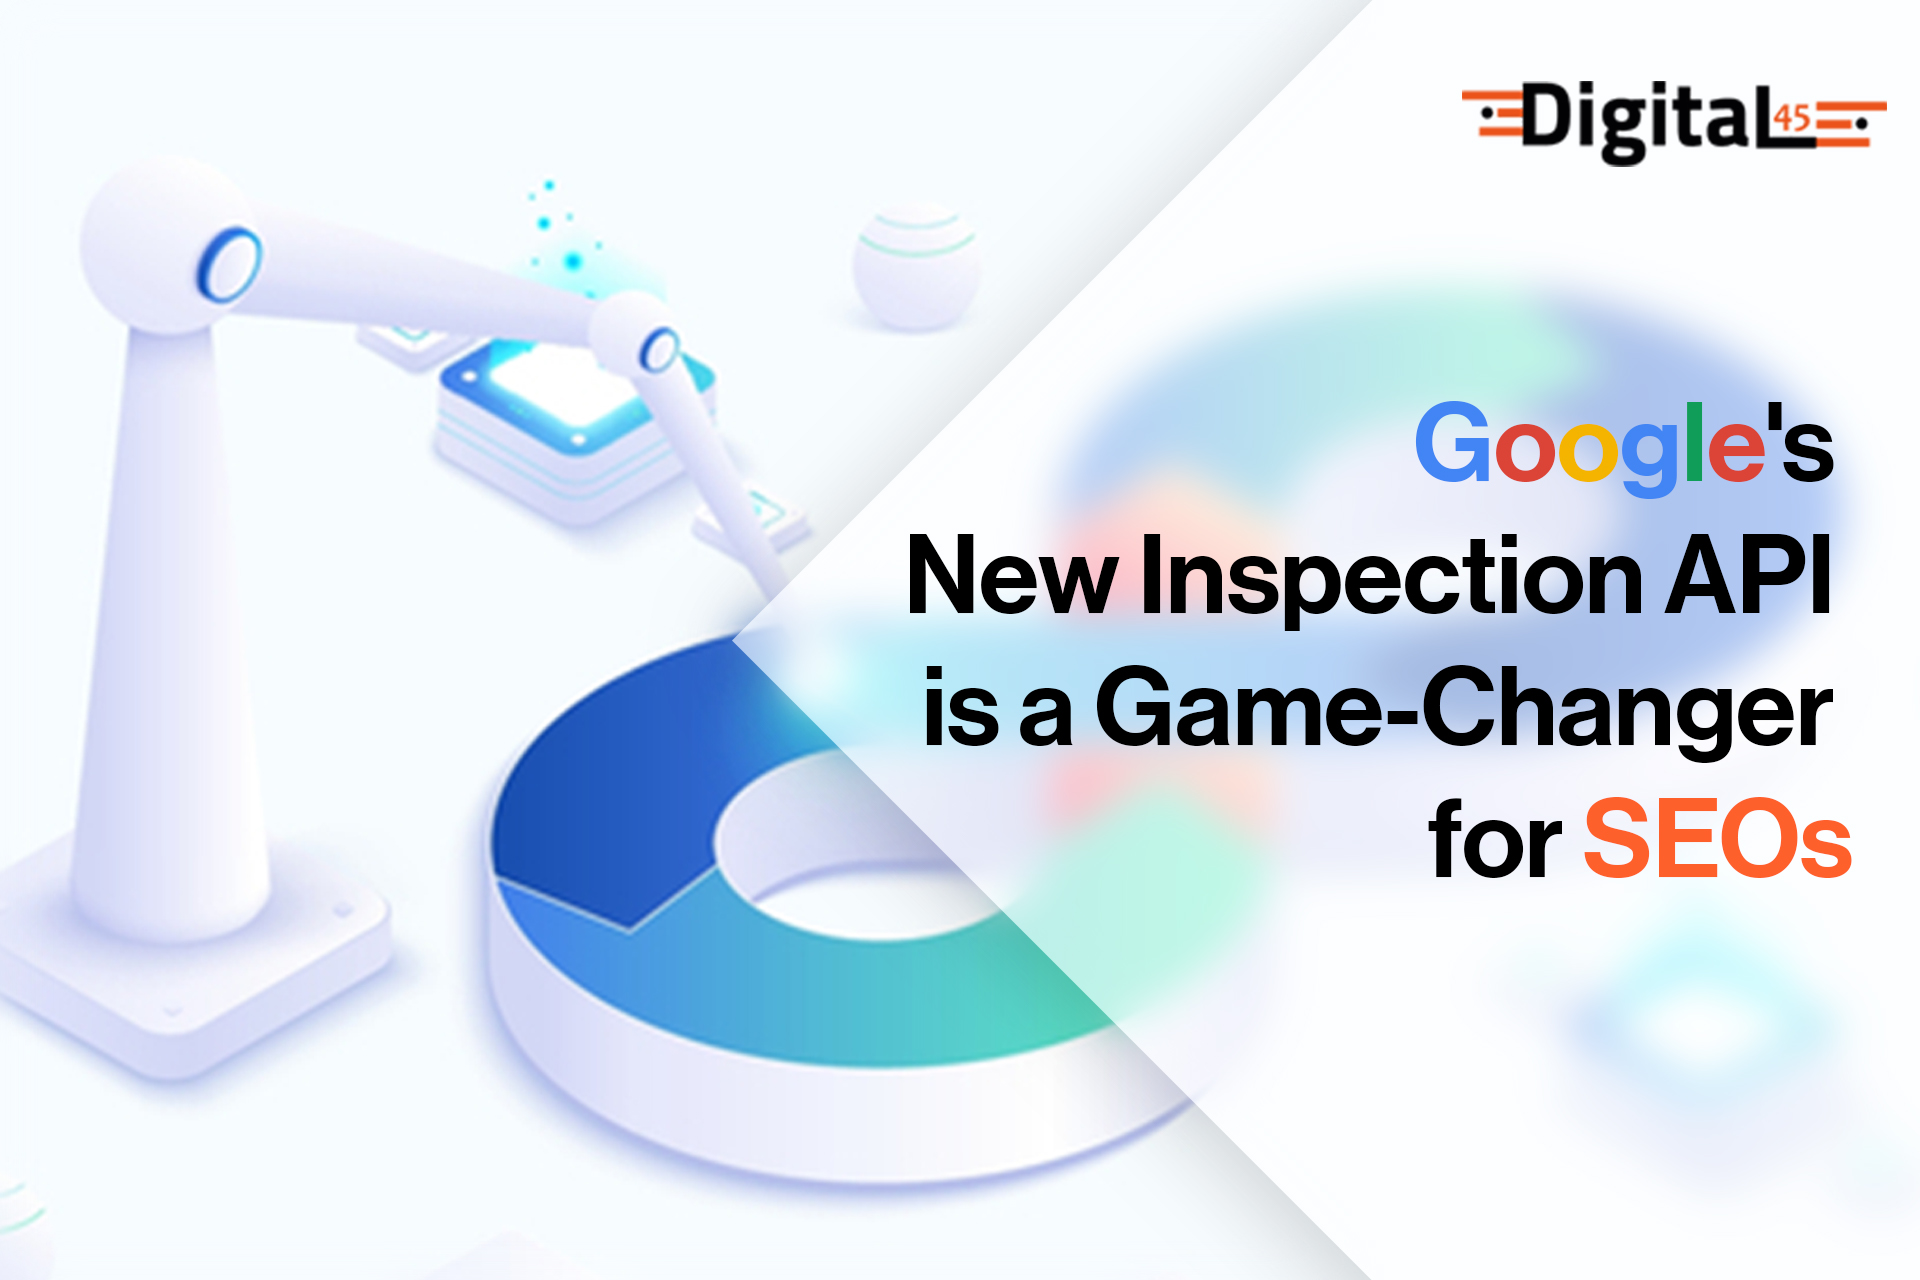 Google's New Inspection API is a Game-Changer for SEOs